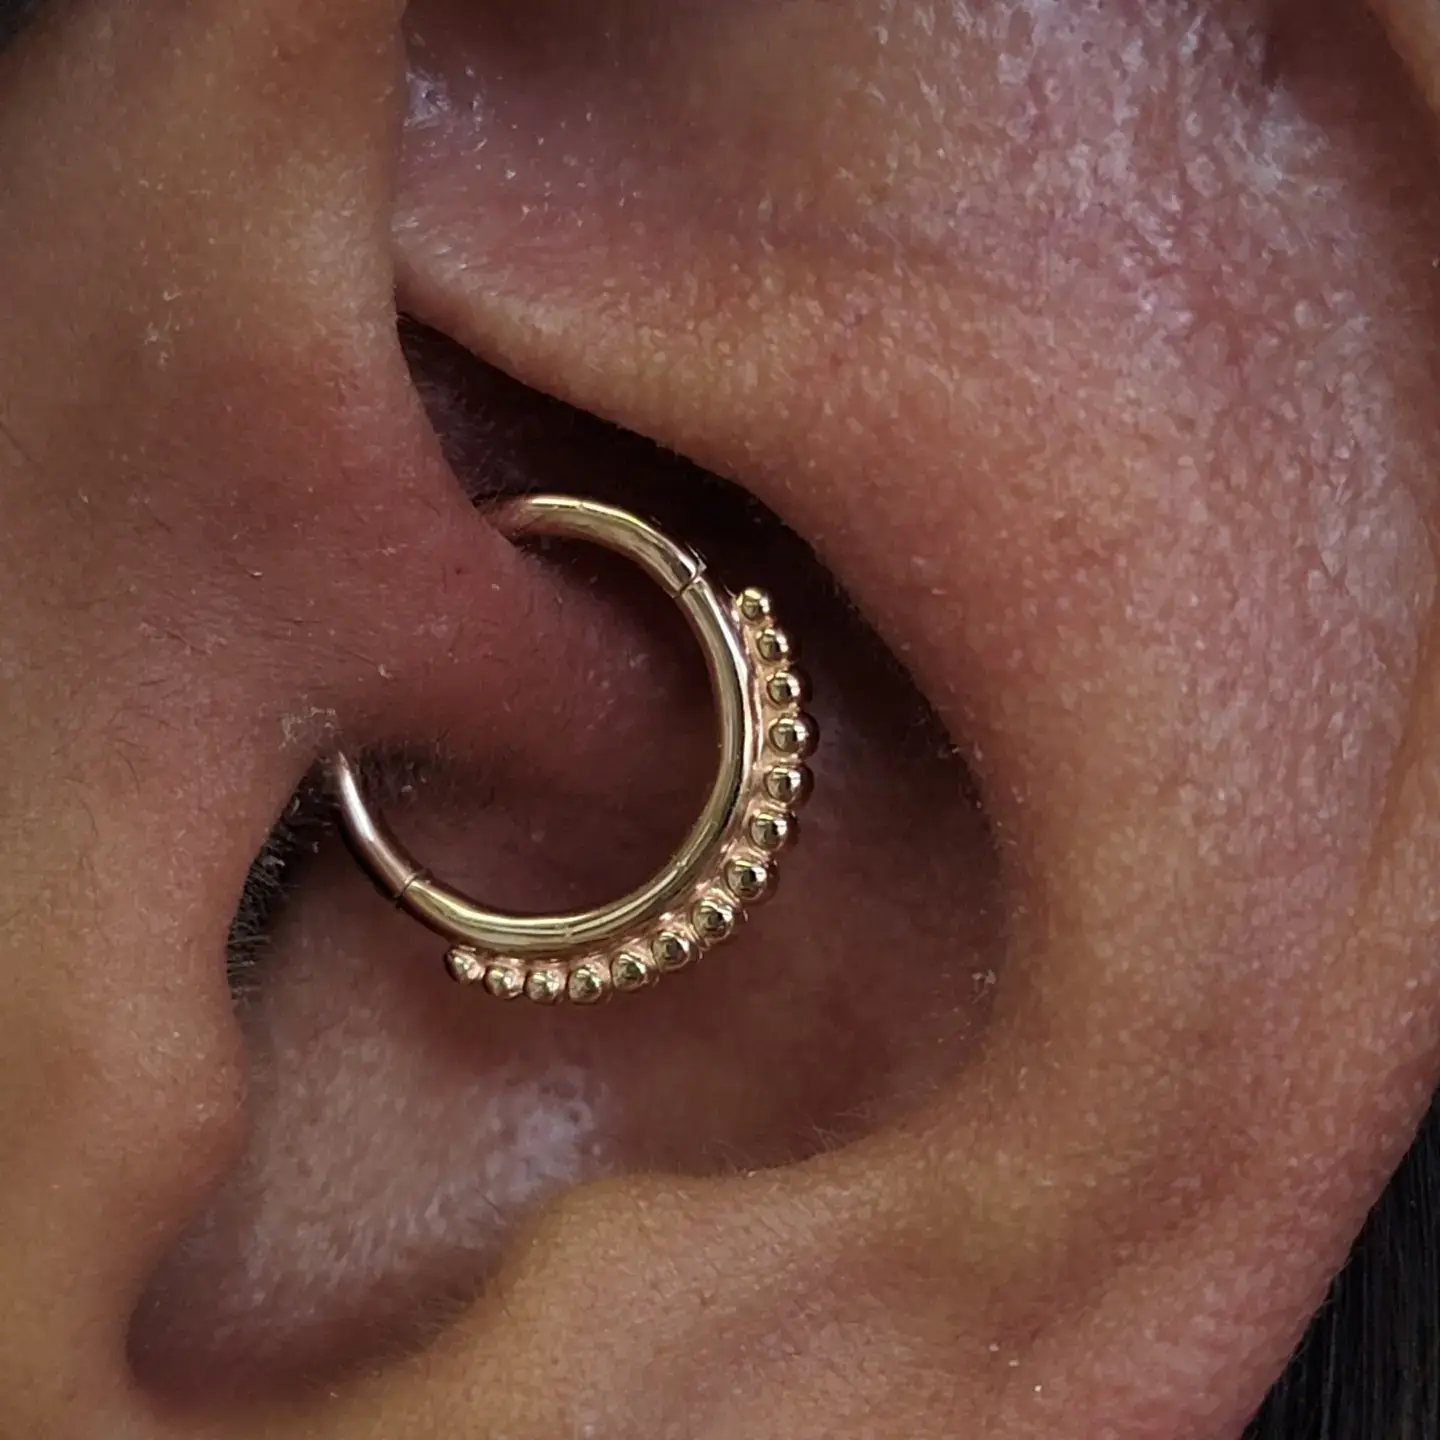 Daith piercing done with solid 14k yellow gold